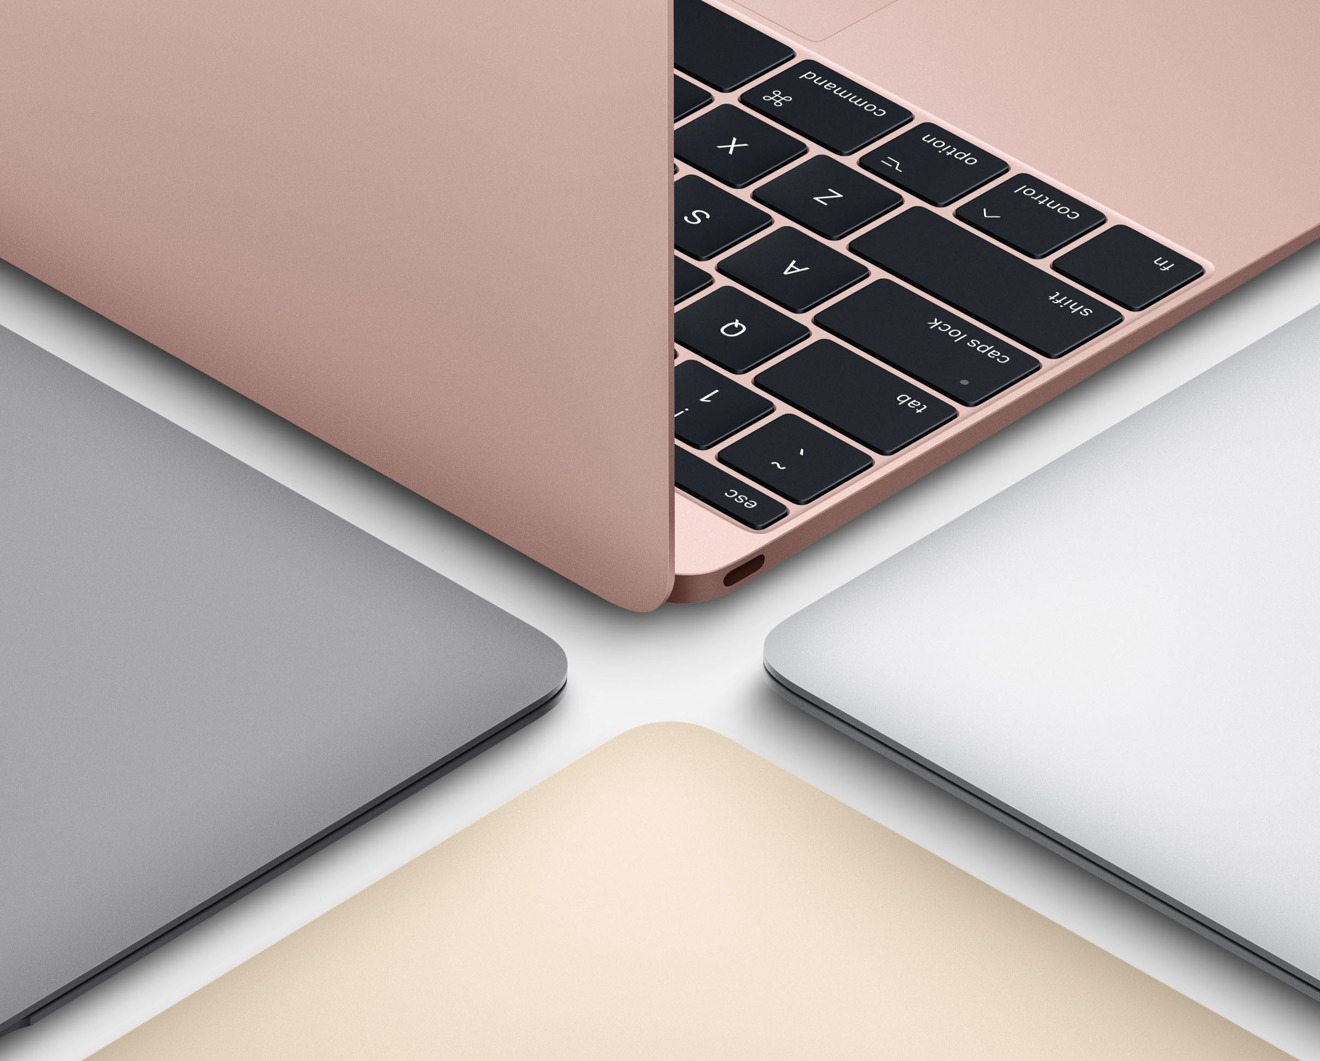 Apple Early 2016 12 inch MacBooks in Silver Space Gray Gold and Rose Gold